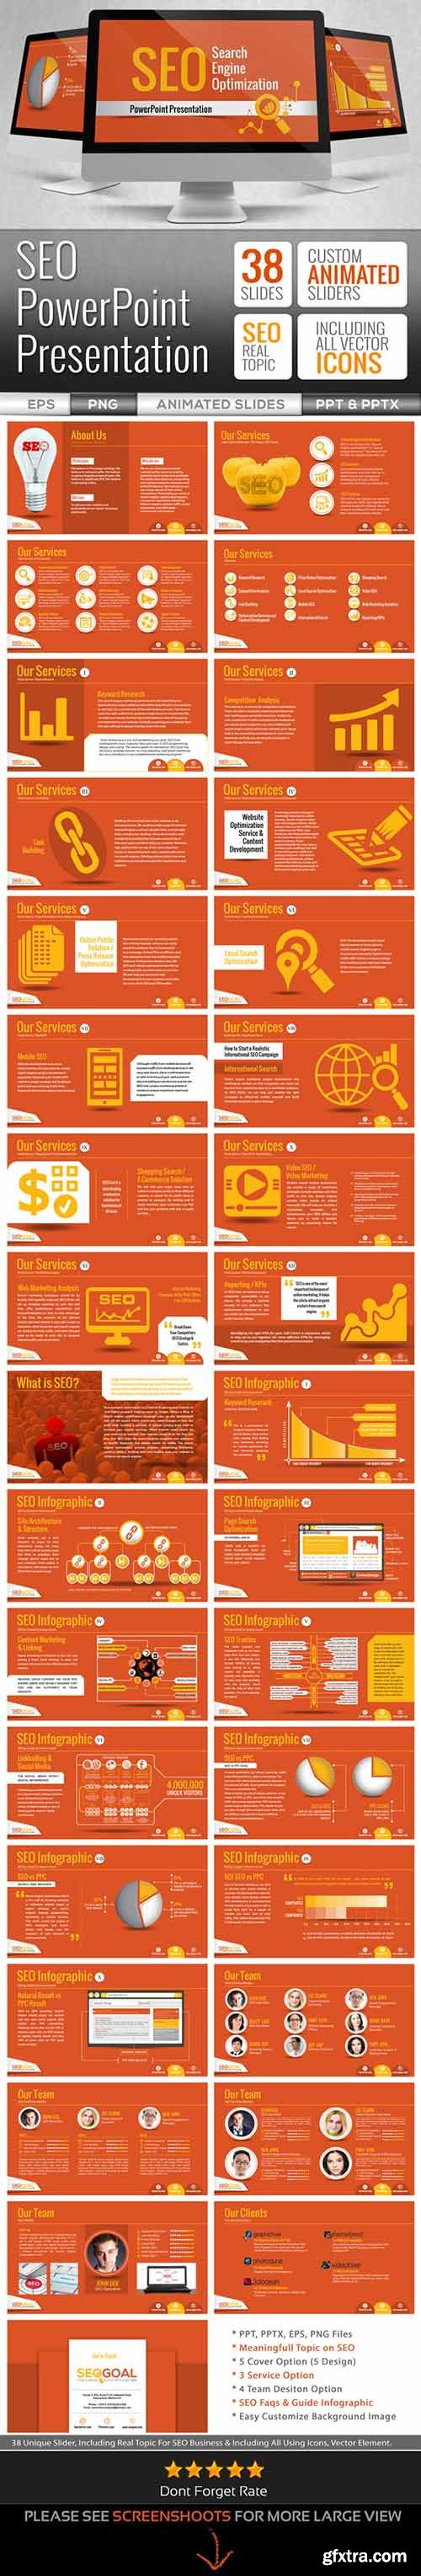 Graphicriver - Search Engine Optimization | SEO Services PowerPoint Presentation Templates 6530014